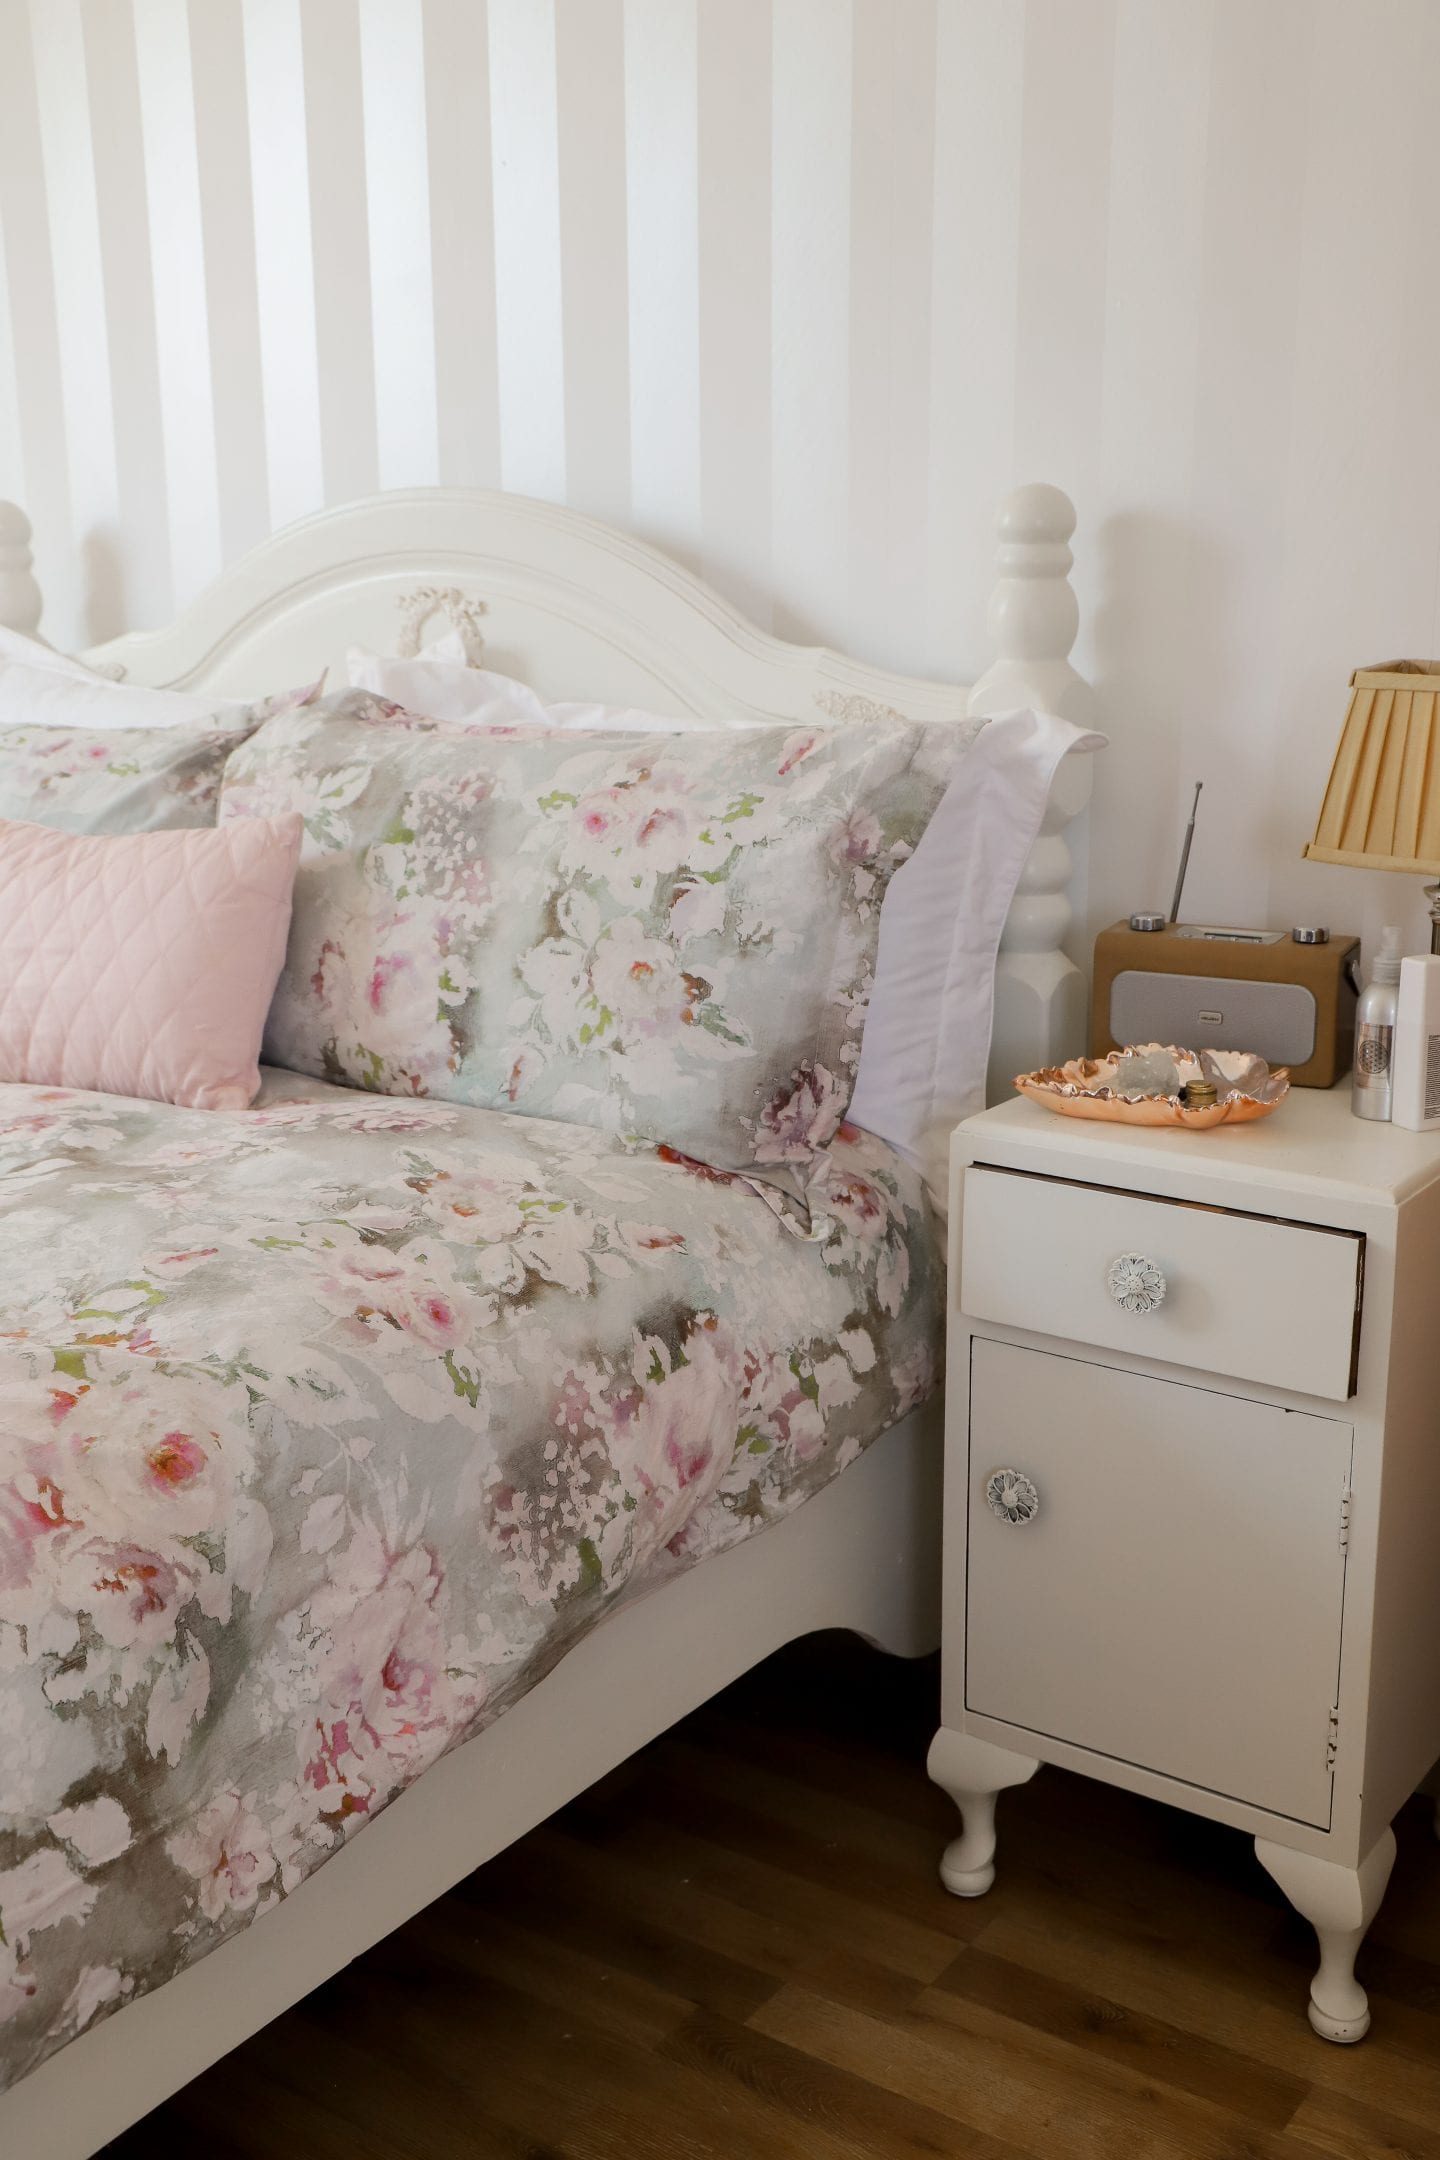 Floral bedsheets on white bed. How to dispose of mattress in Ireland. 